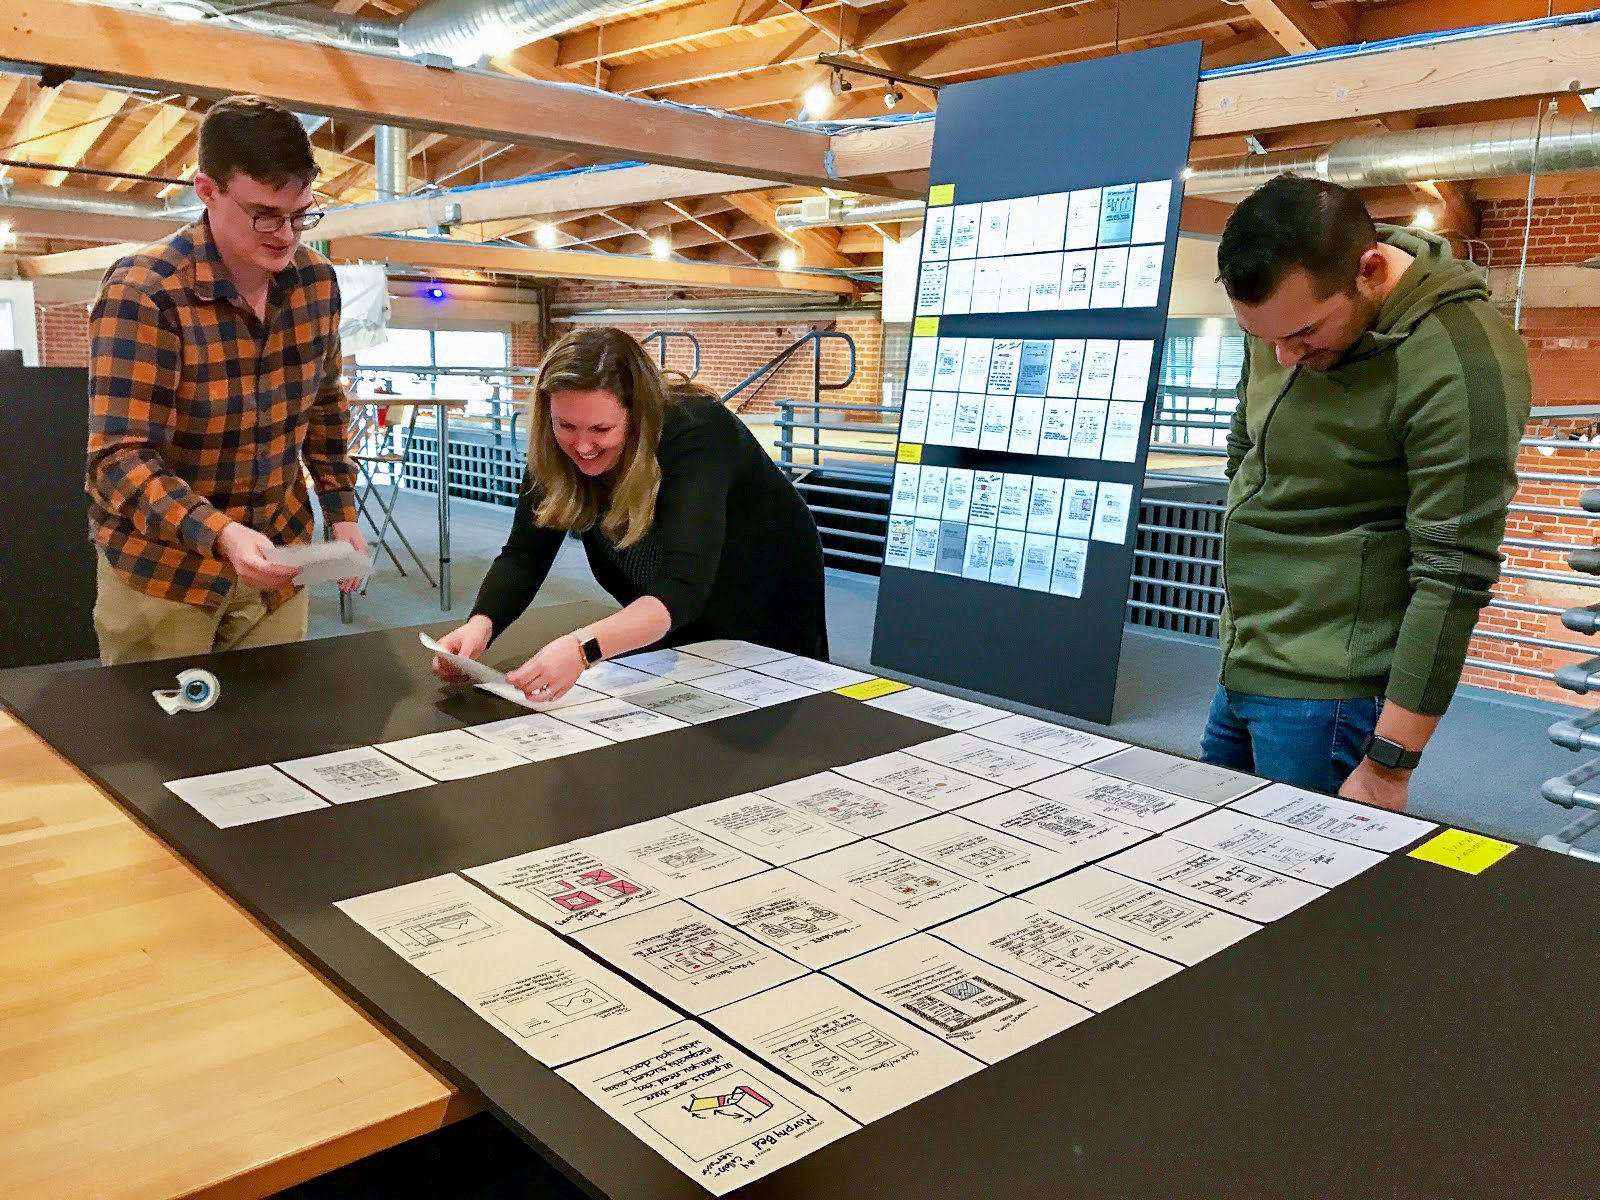 UX consultants prepare concept cards for an upcoming workshop on the mezzanine level of our San Diego design studio.